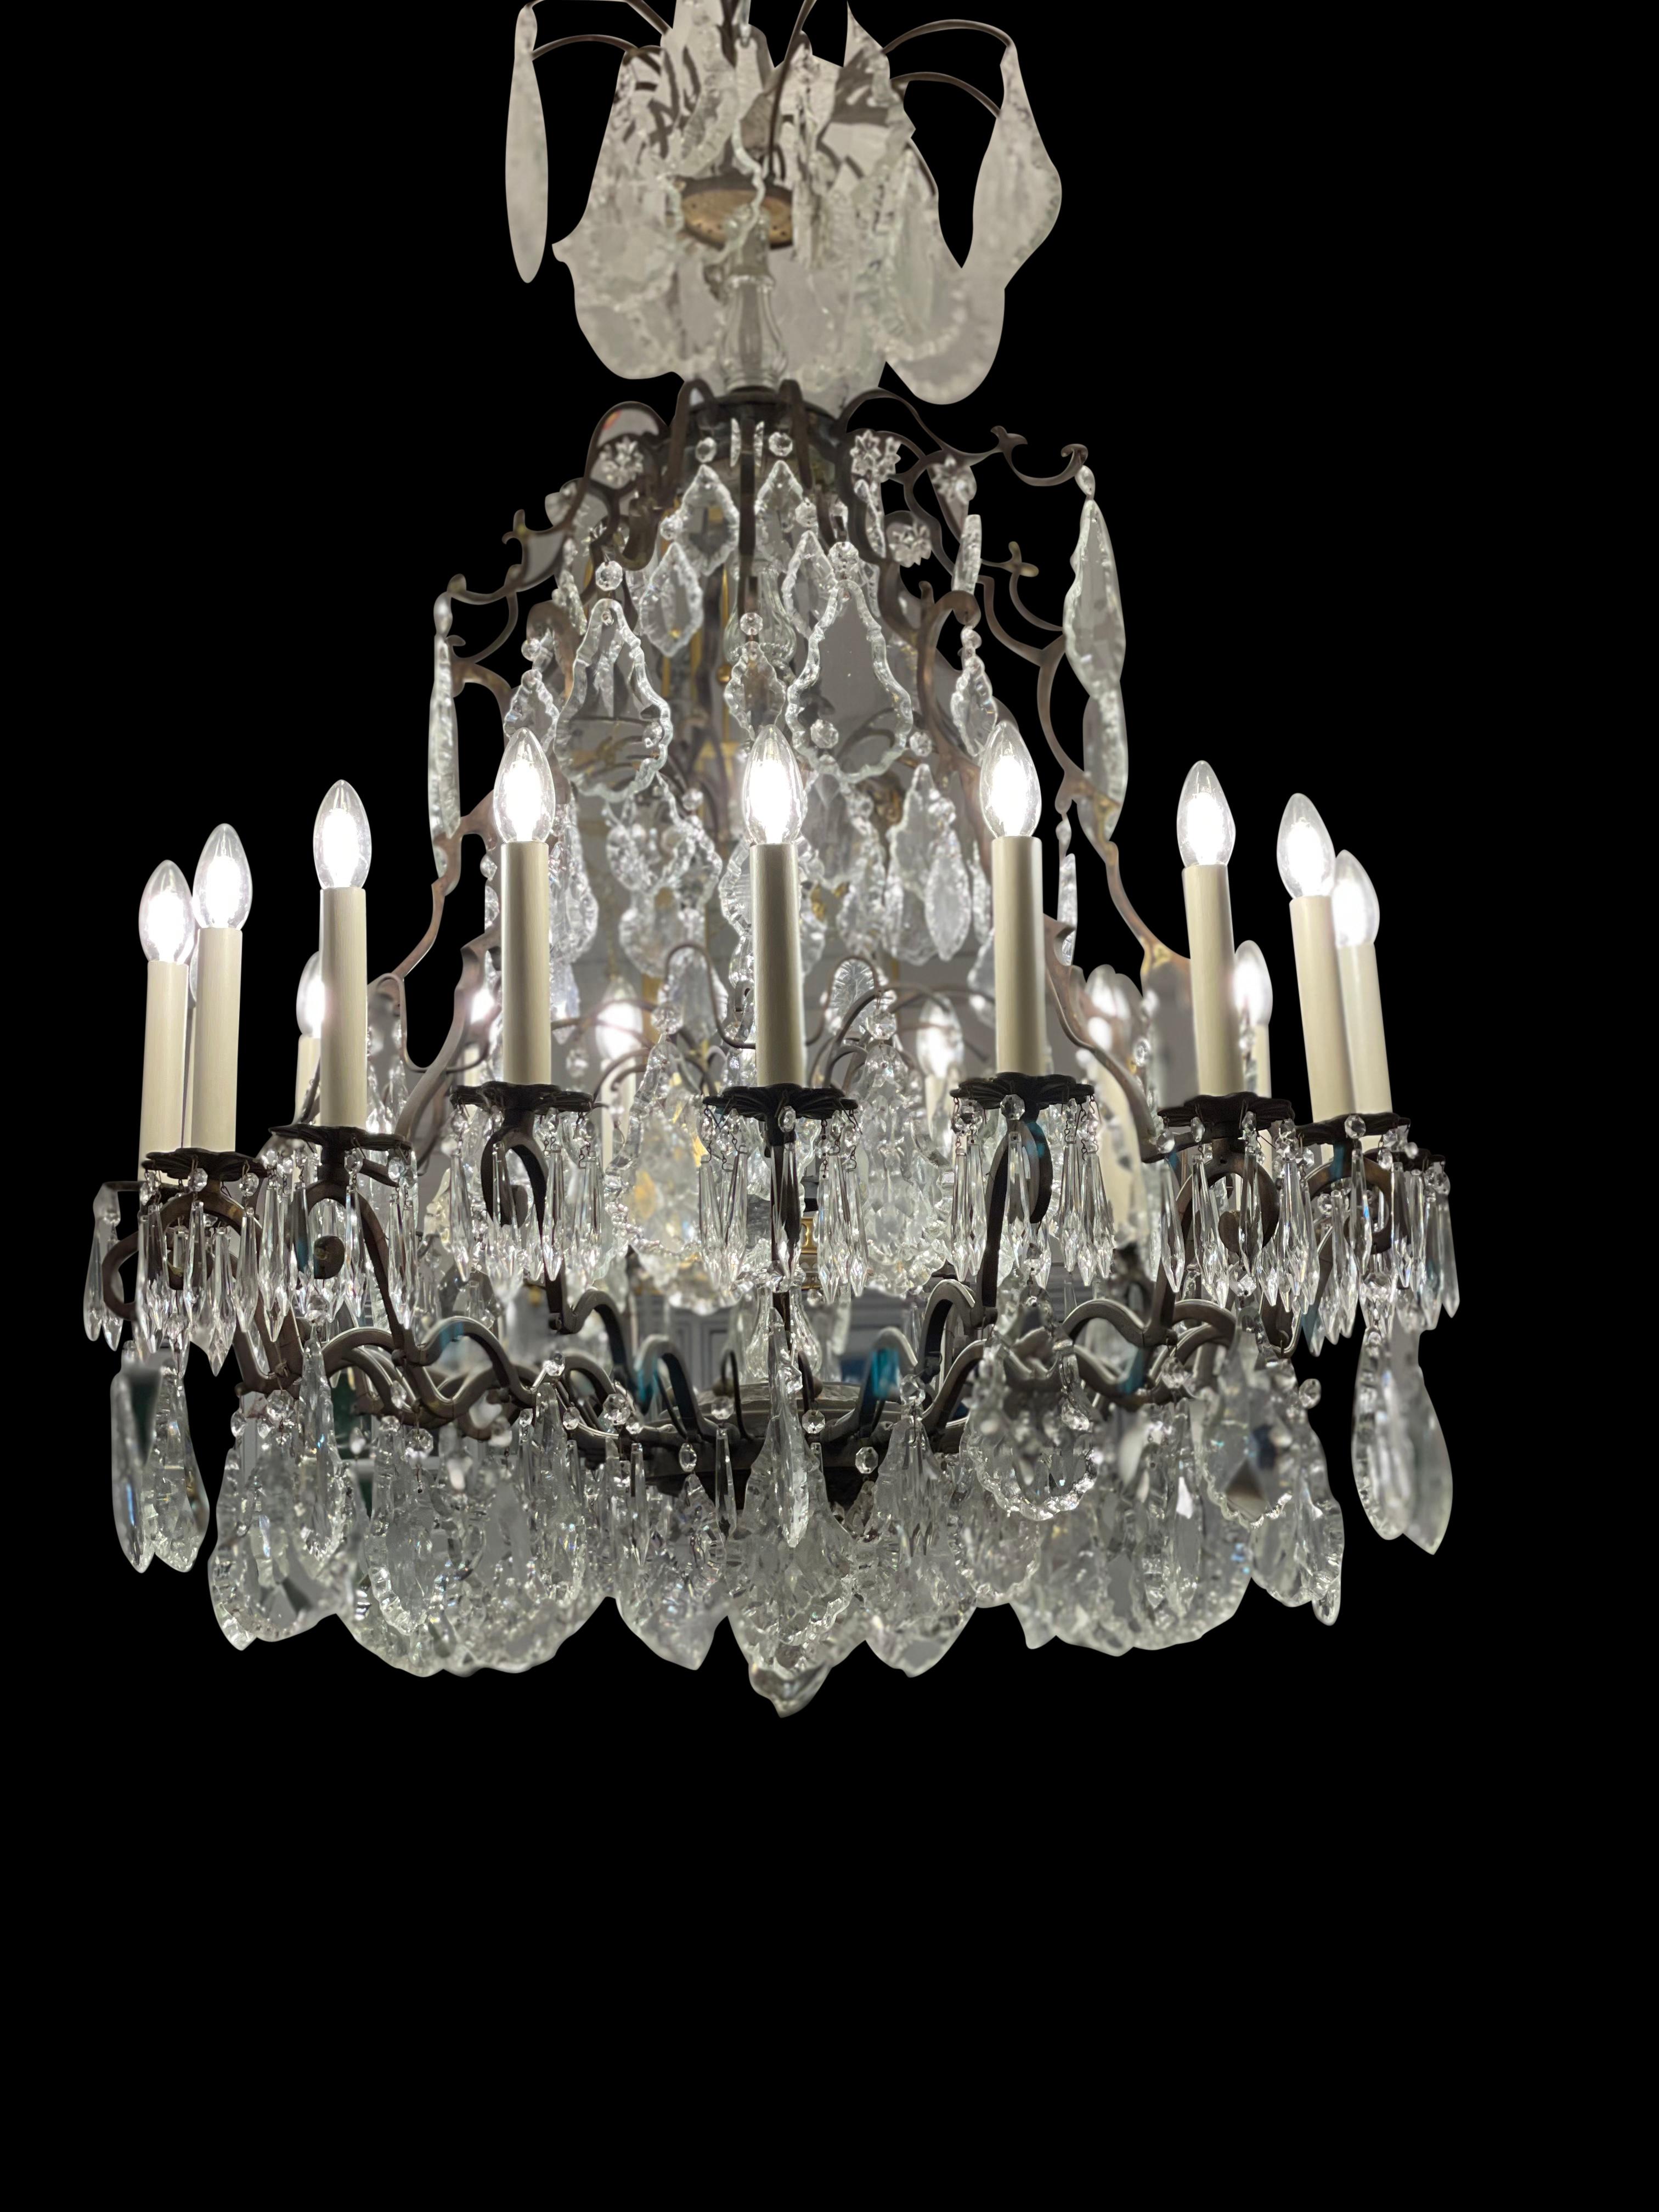 French crystal and bronze 14 light chandelier with a matching canopy and original chain. This particular chandelier is amazing, it's size is fantastic, and it's condition remarkable. Large handcut crystals, an exquisite scrolled frame, and it having